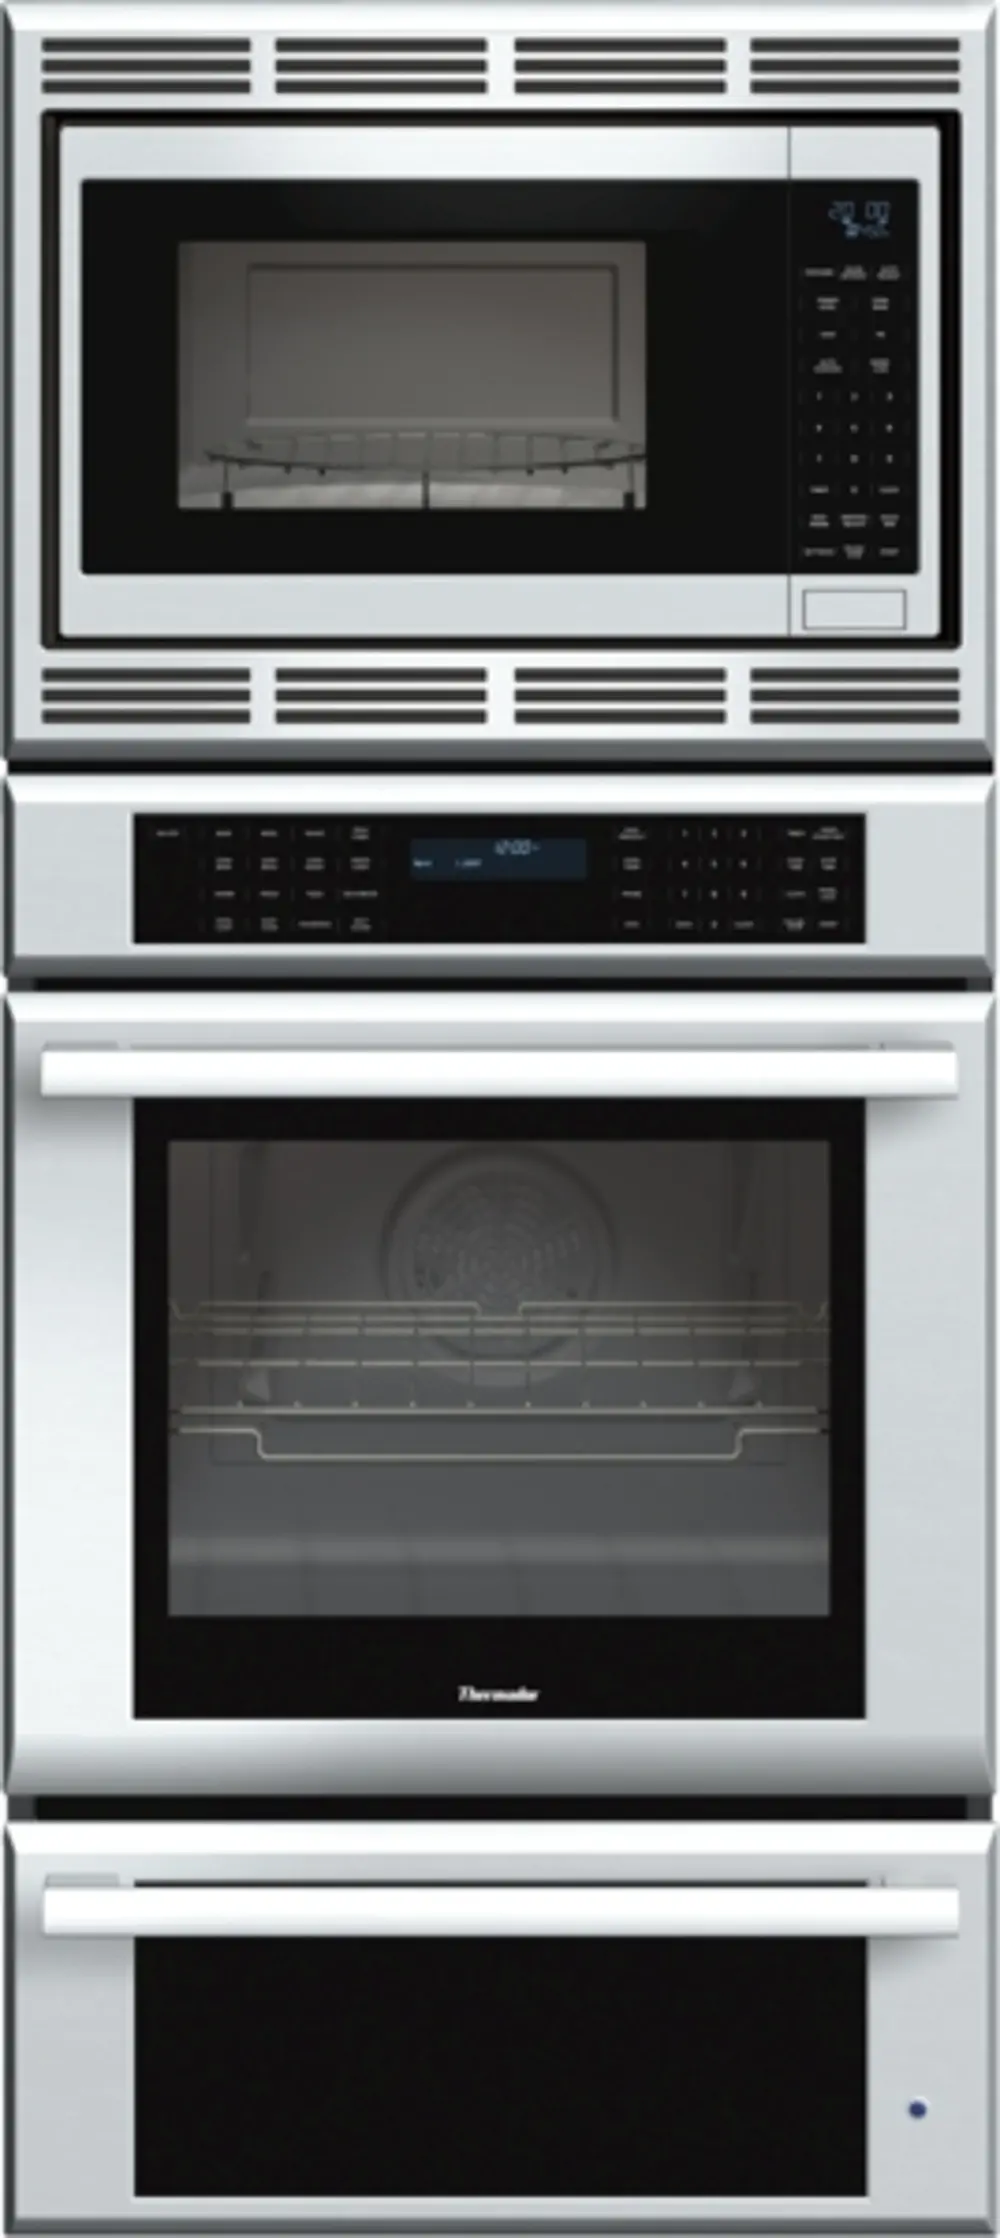 MEDMCW71JS Thermador 27 inch Masterpiece Series Triple Oven (oven, convection microwave and warming drawer) MEDMCW71JS -1